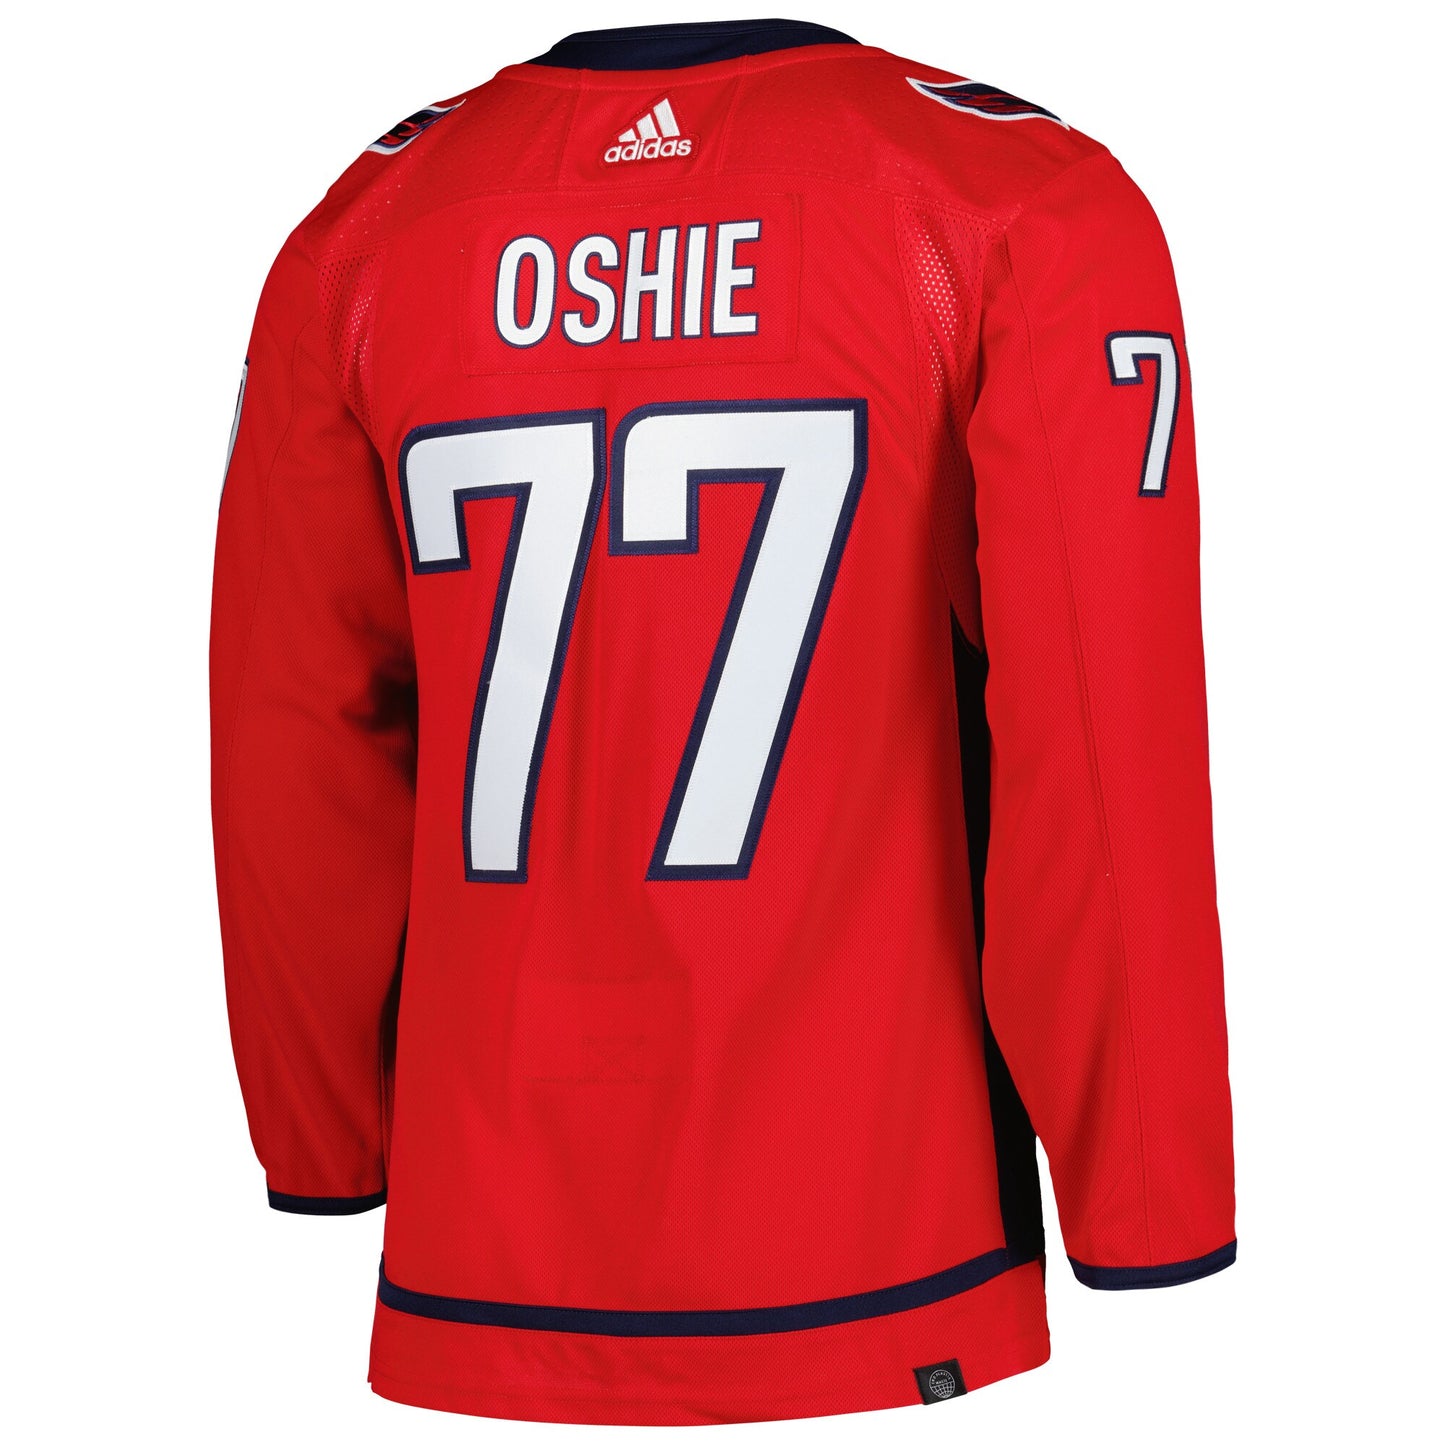 TJ Oshie Washington Capitals adidas Home Primegreen Authentic Pro Player Jersey - Red